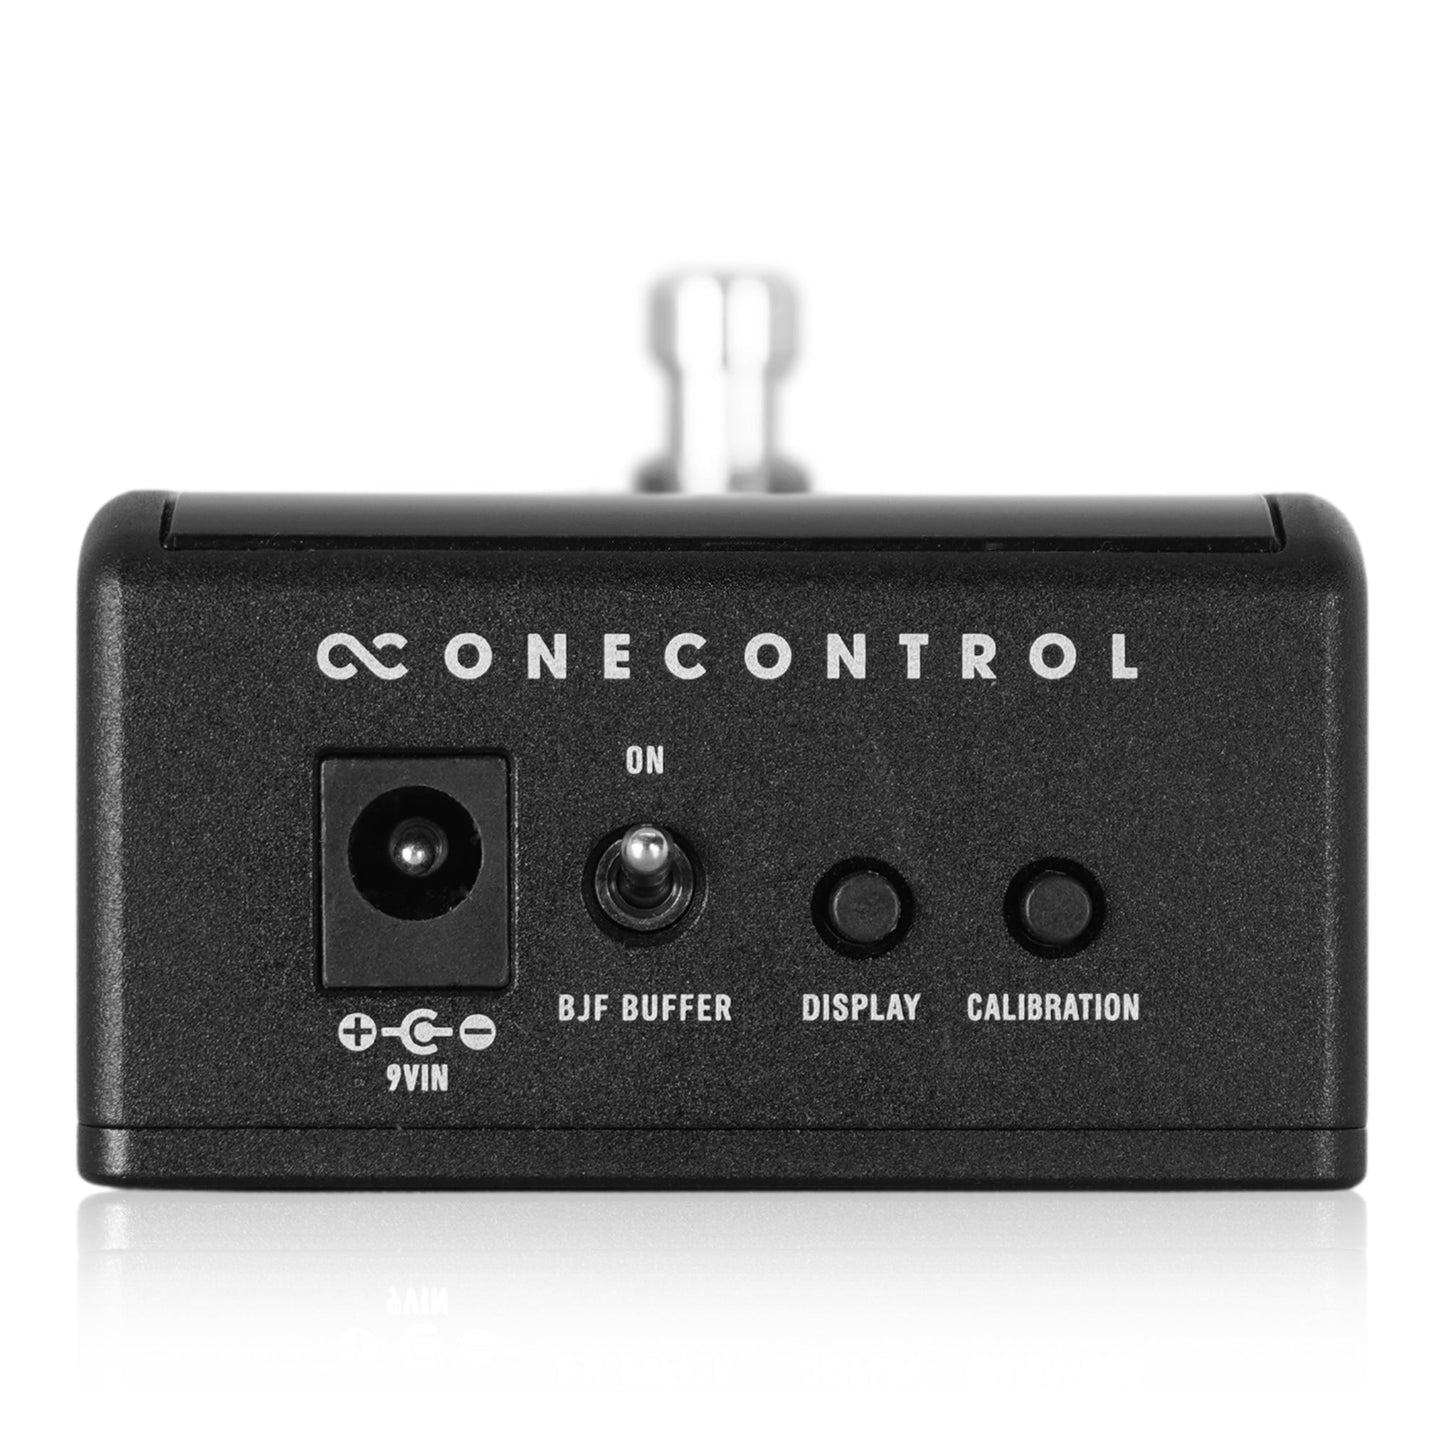 One Control/LX Tuner with BJF BUFFER